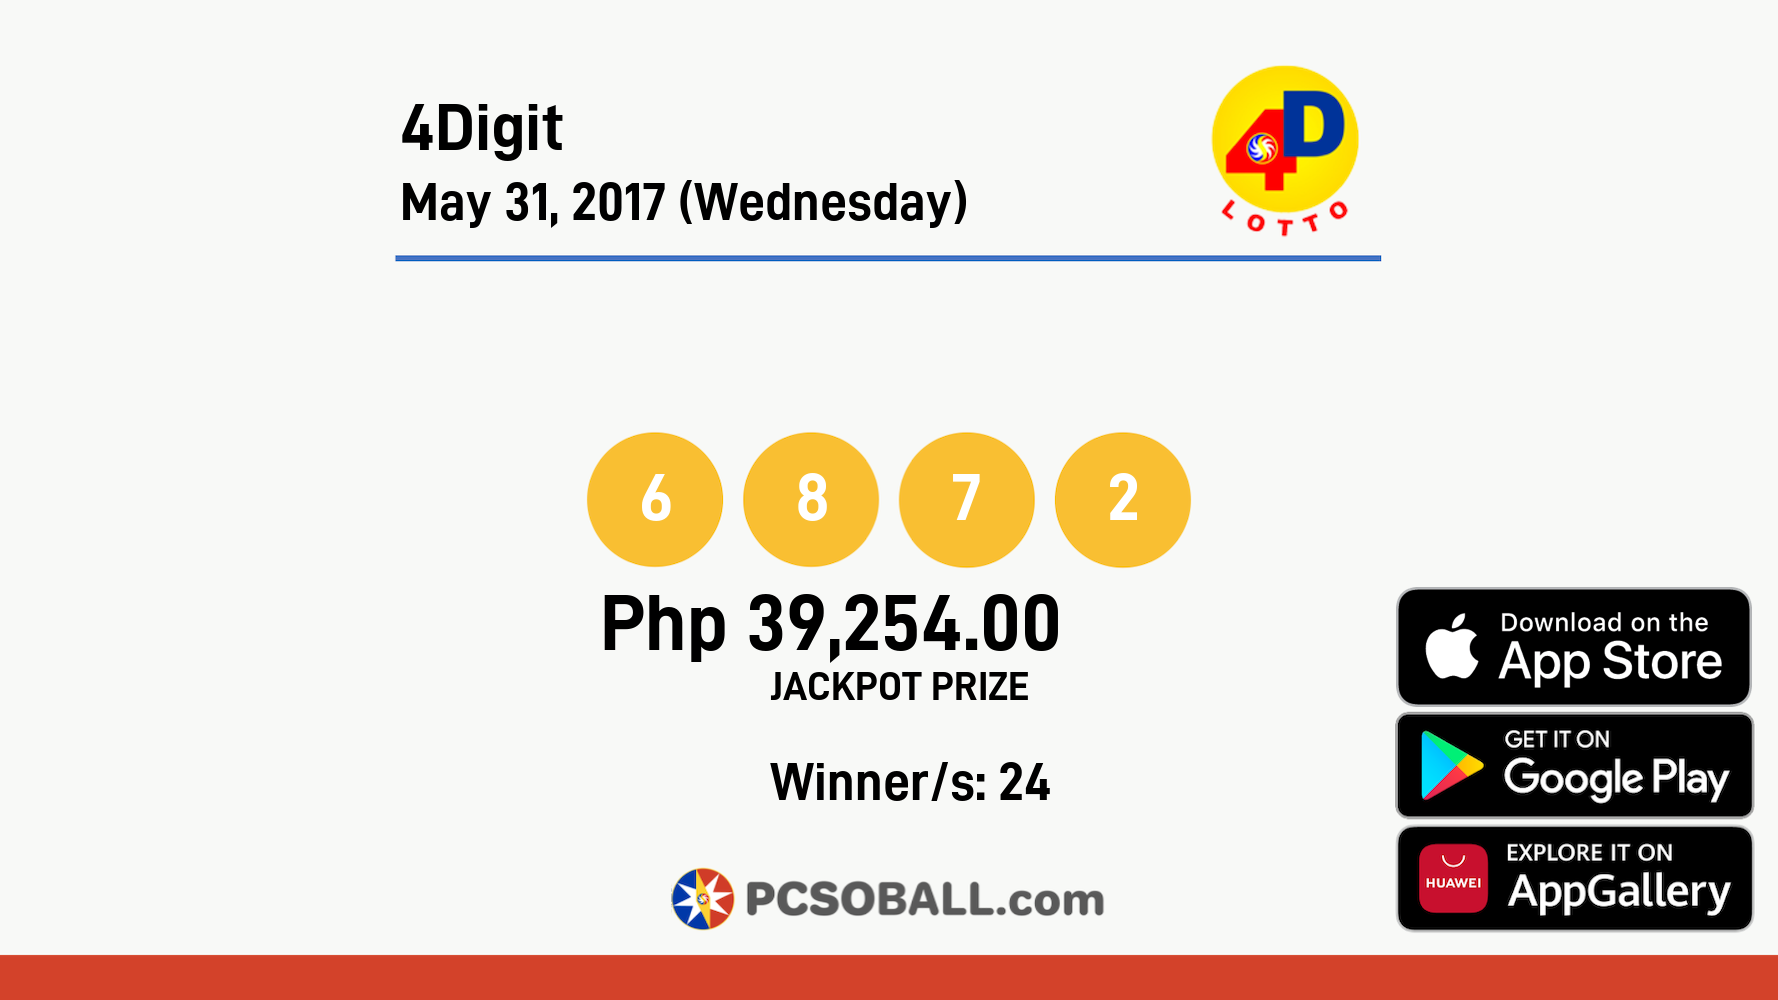 4Digit May 31, 2017 (Wednesday) Result